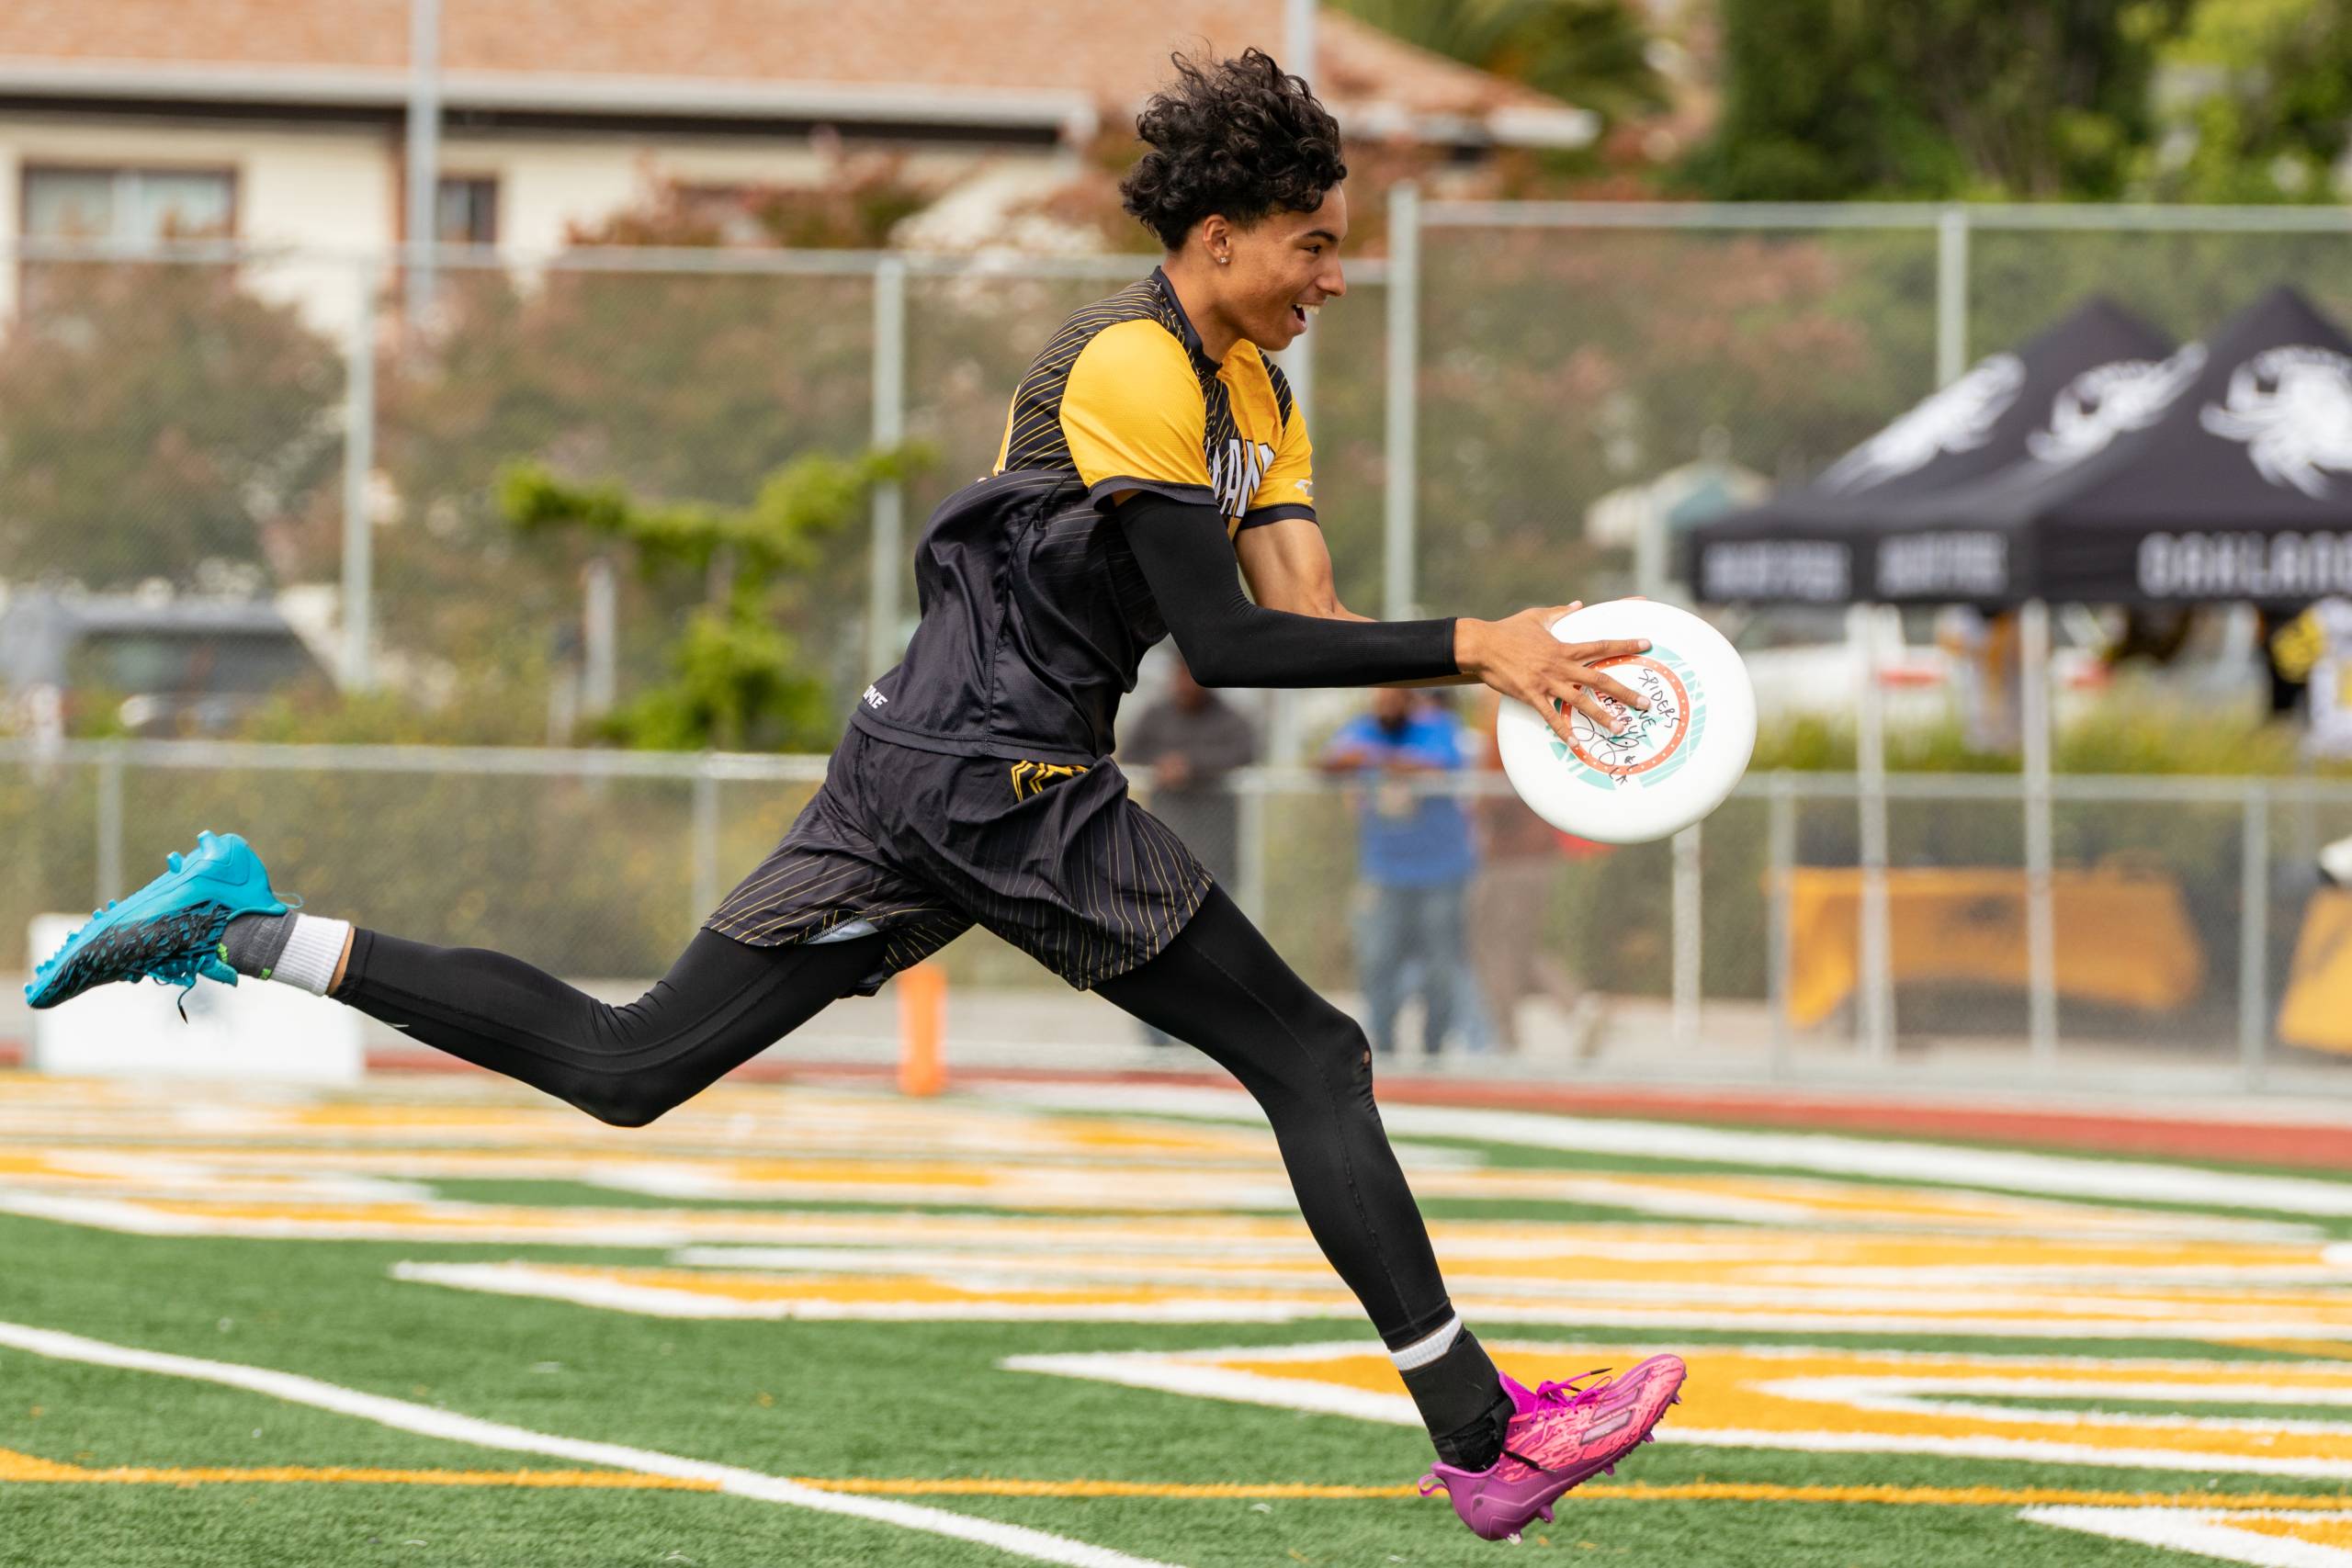 an ultimate frisbee player runs for a score with frisbee in hand